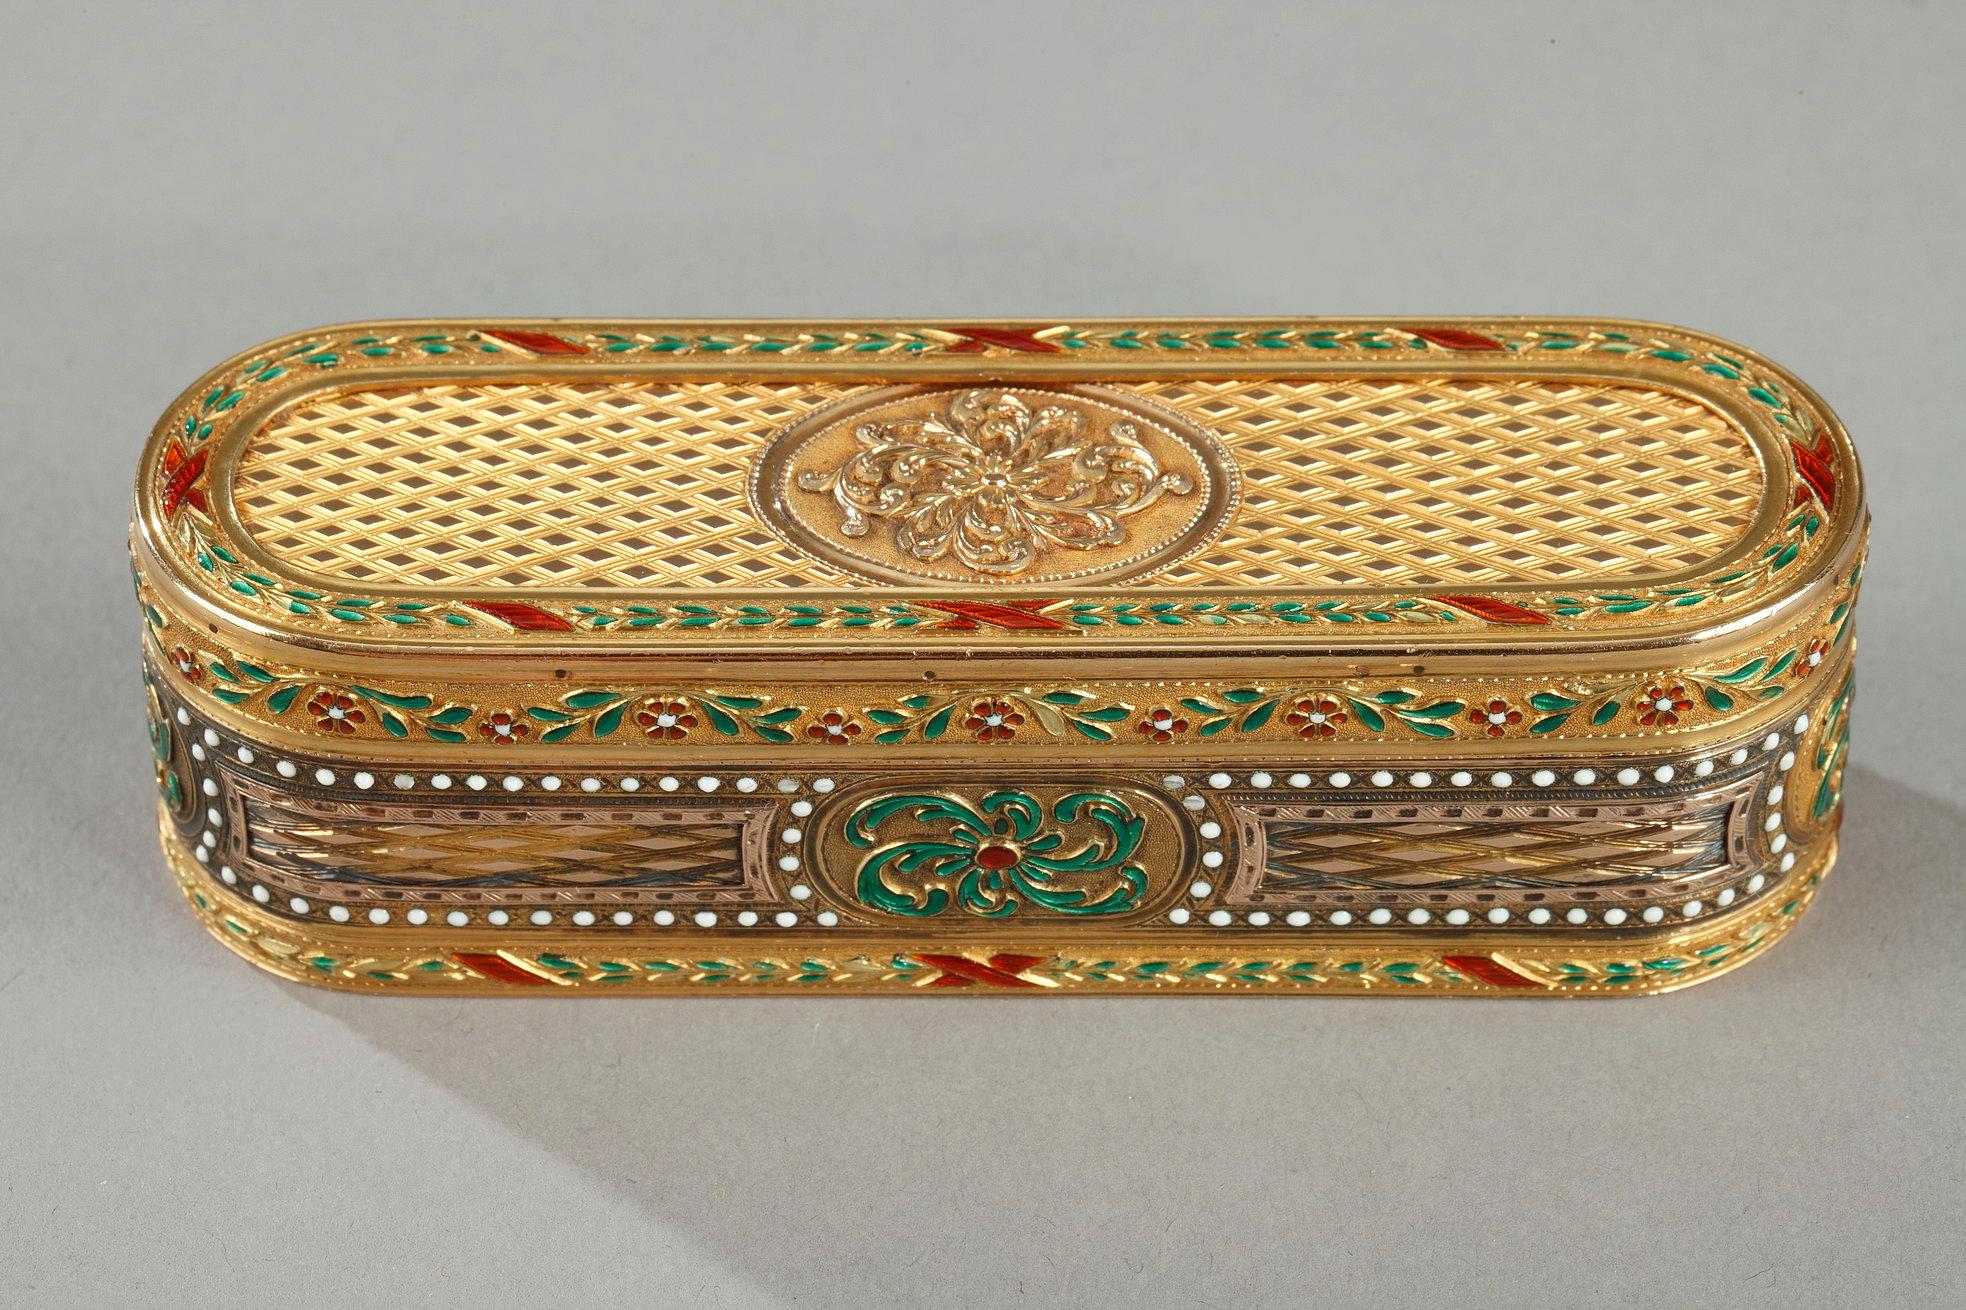 Oblong snuff box in gold of several tones and enamel. The box is decorated with guilloche panels with lattice patterns and underlined with friezes decorated with floral patterns enhanced with polychrome enamel. The lid is decorated with a scroll